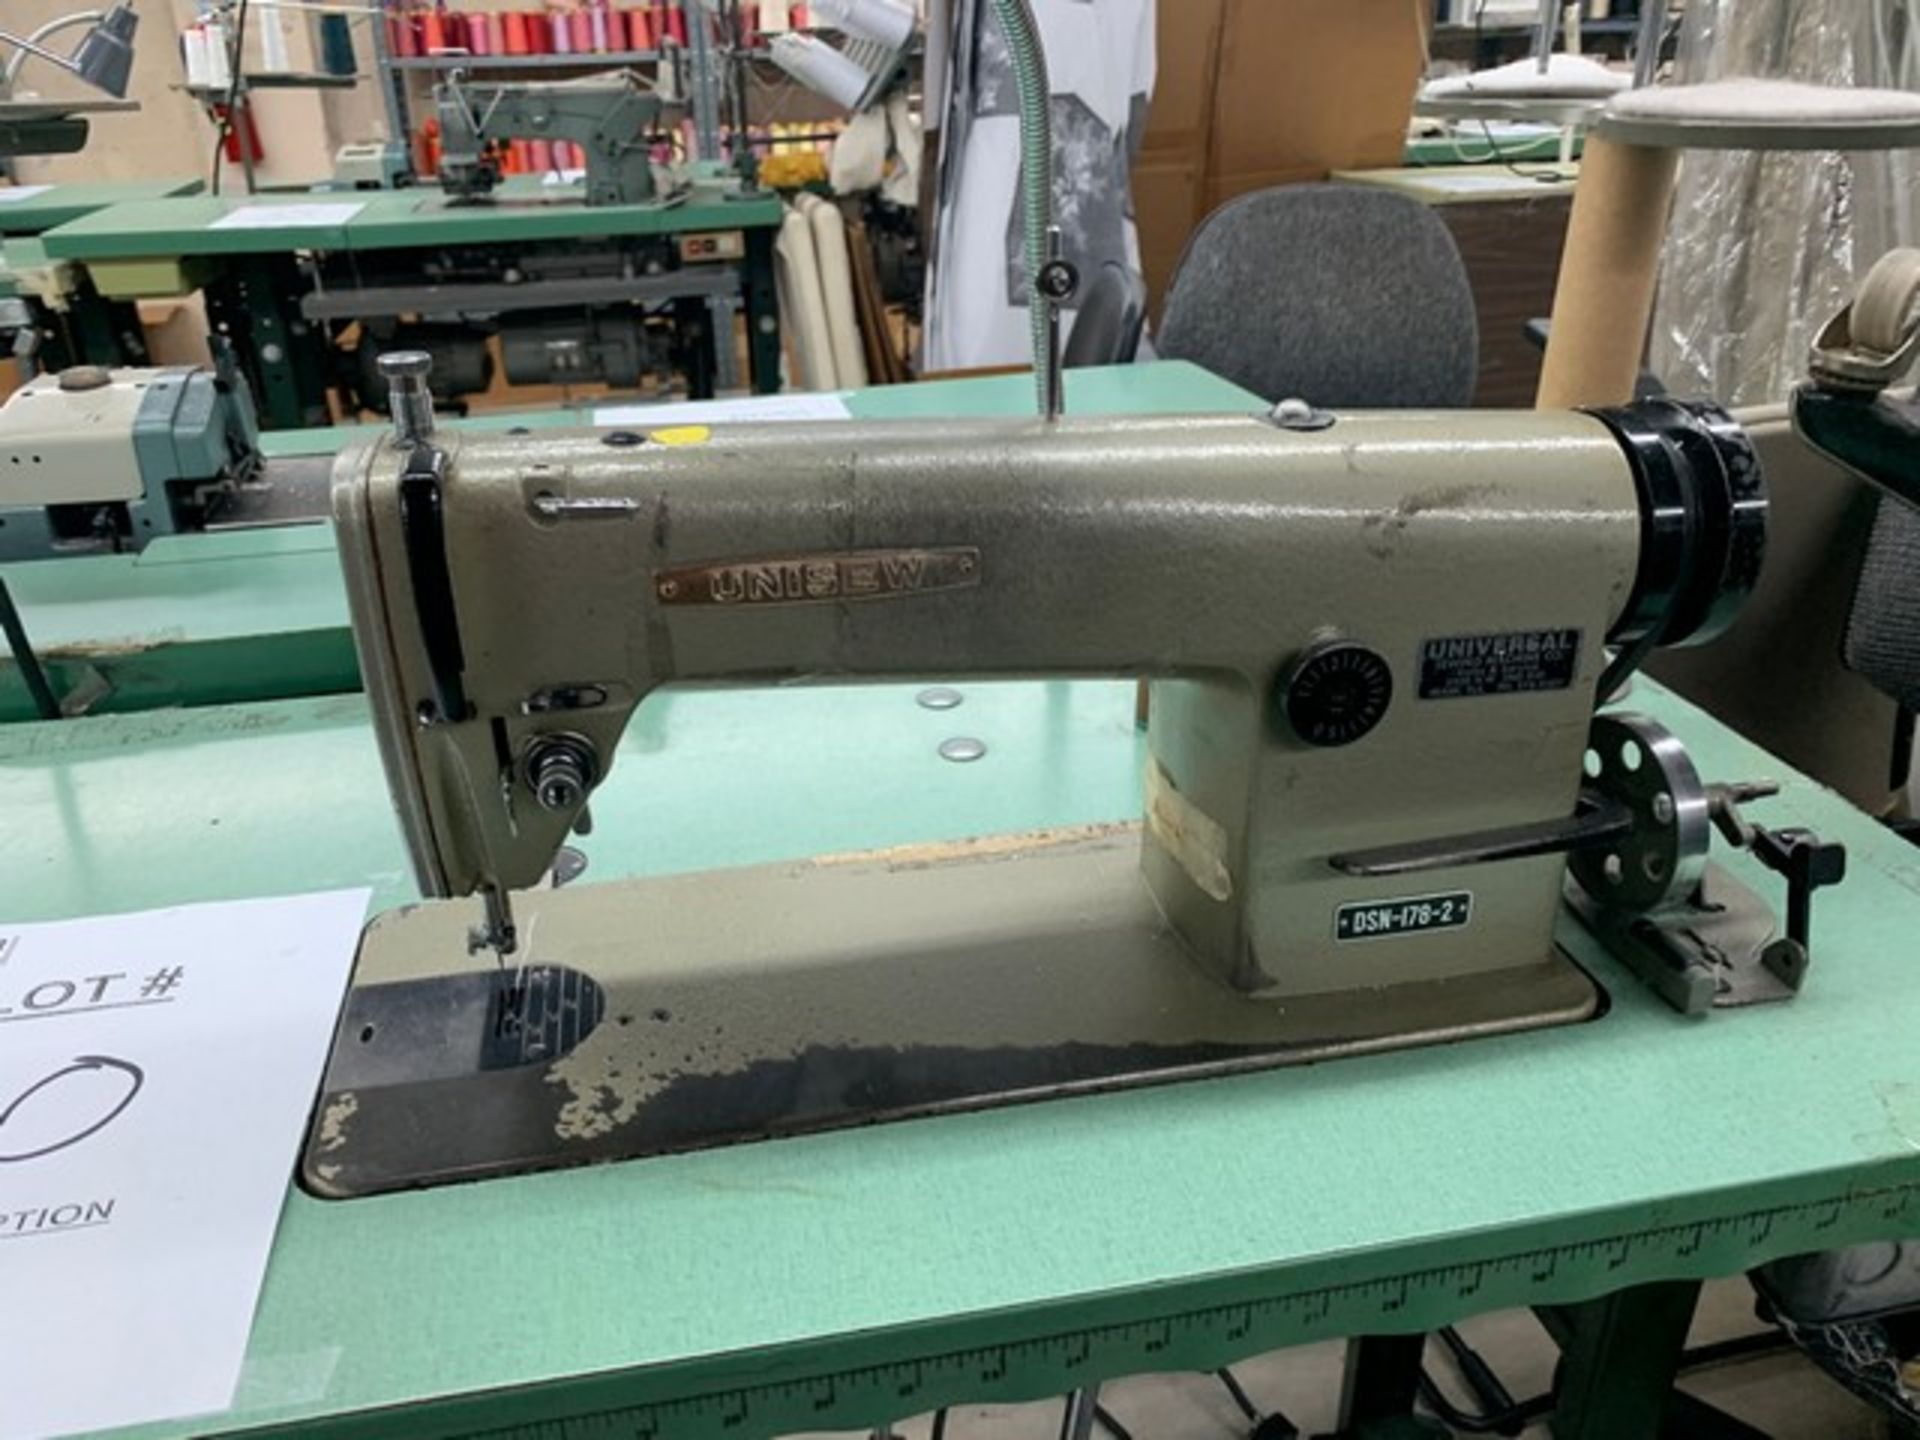 UNISEW DSN-178-2 SEWING MACHINE WITH MOTOR, STAND & LIGHT - Image 2 of 2